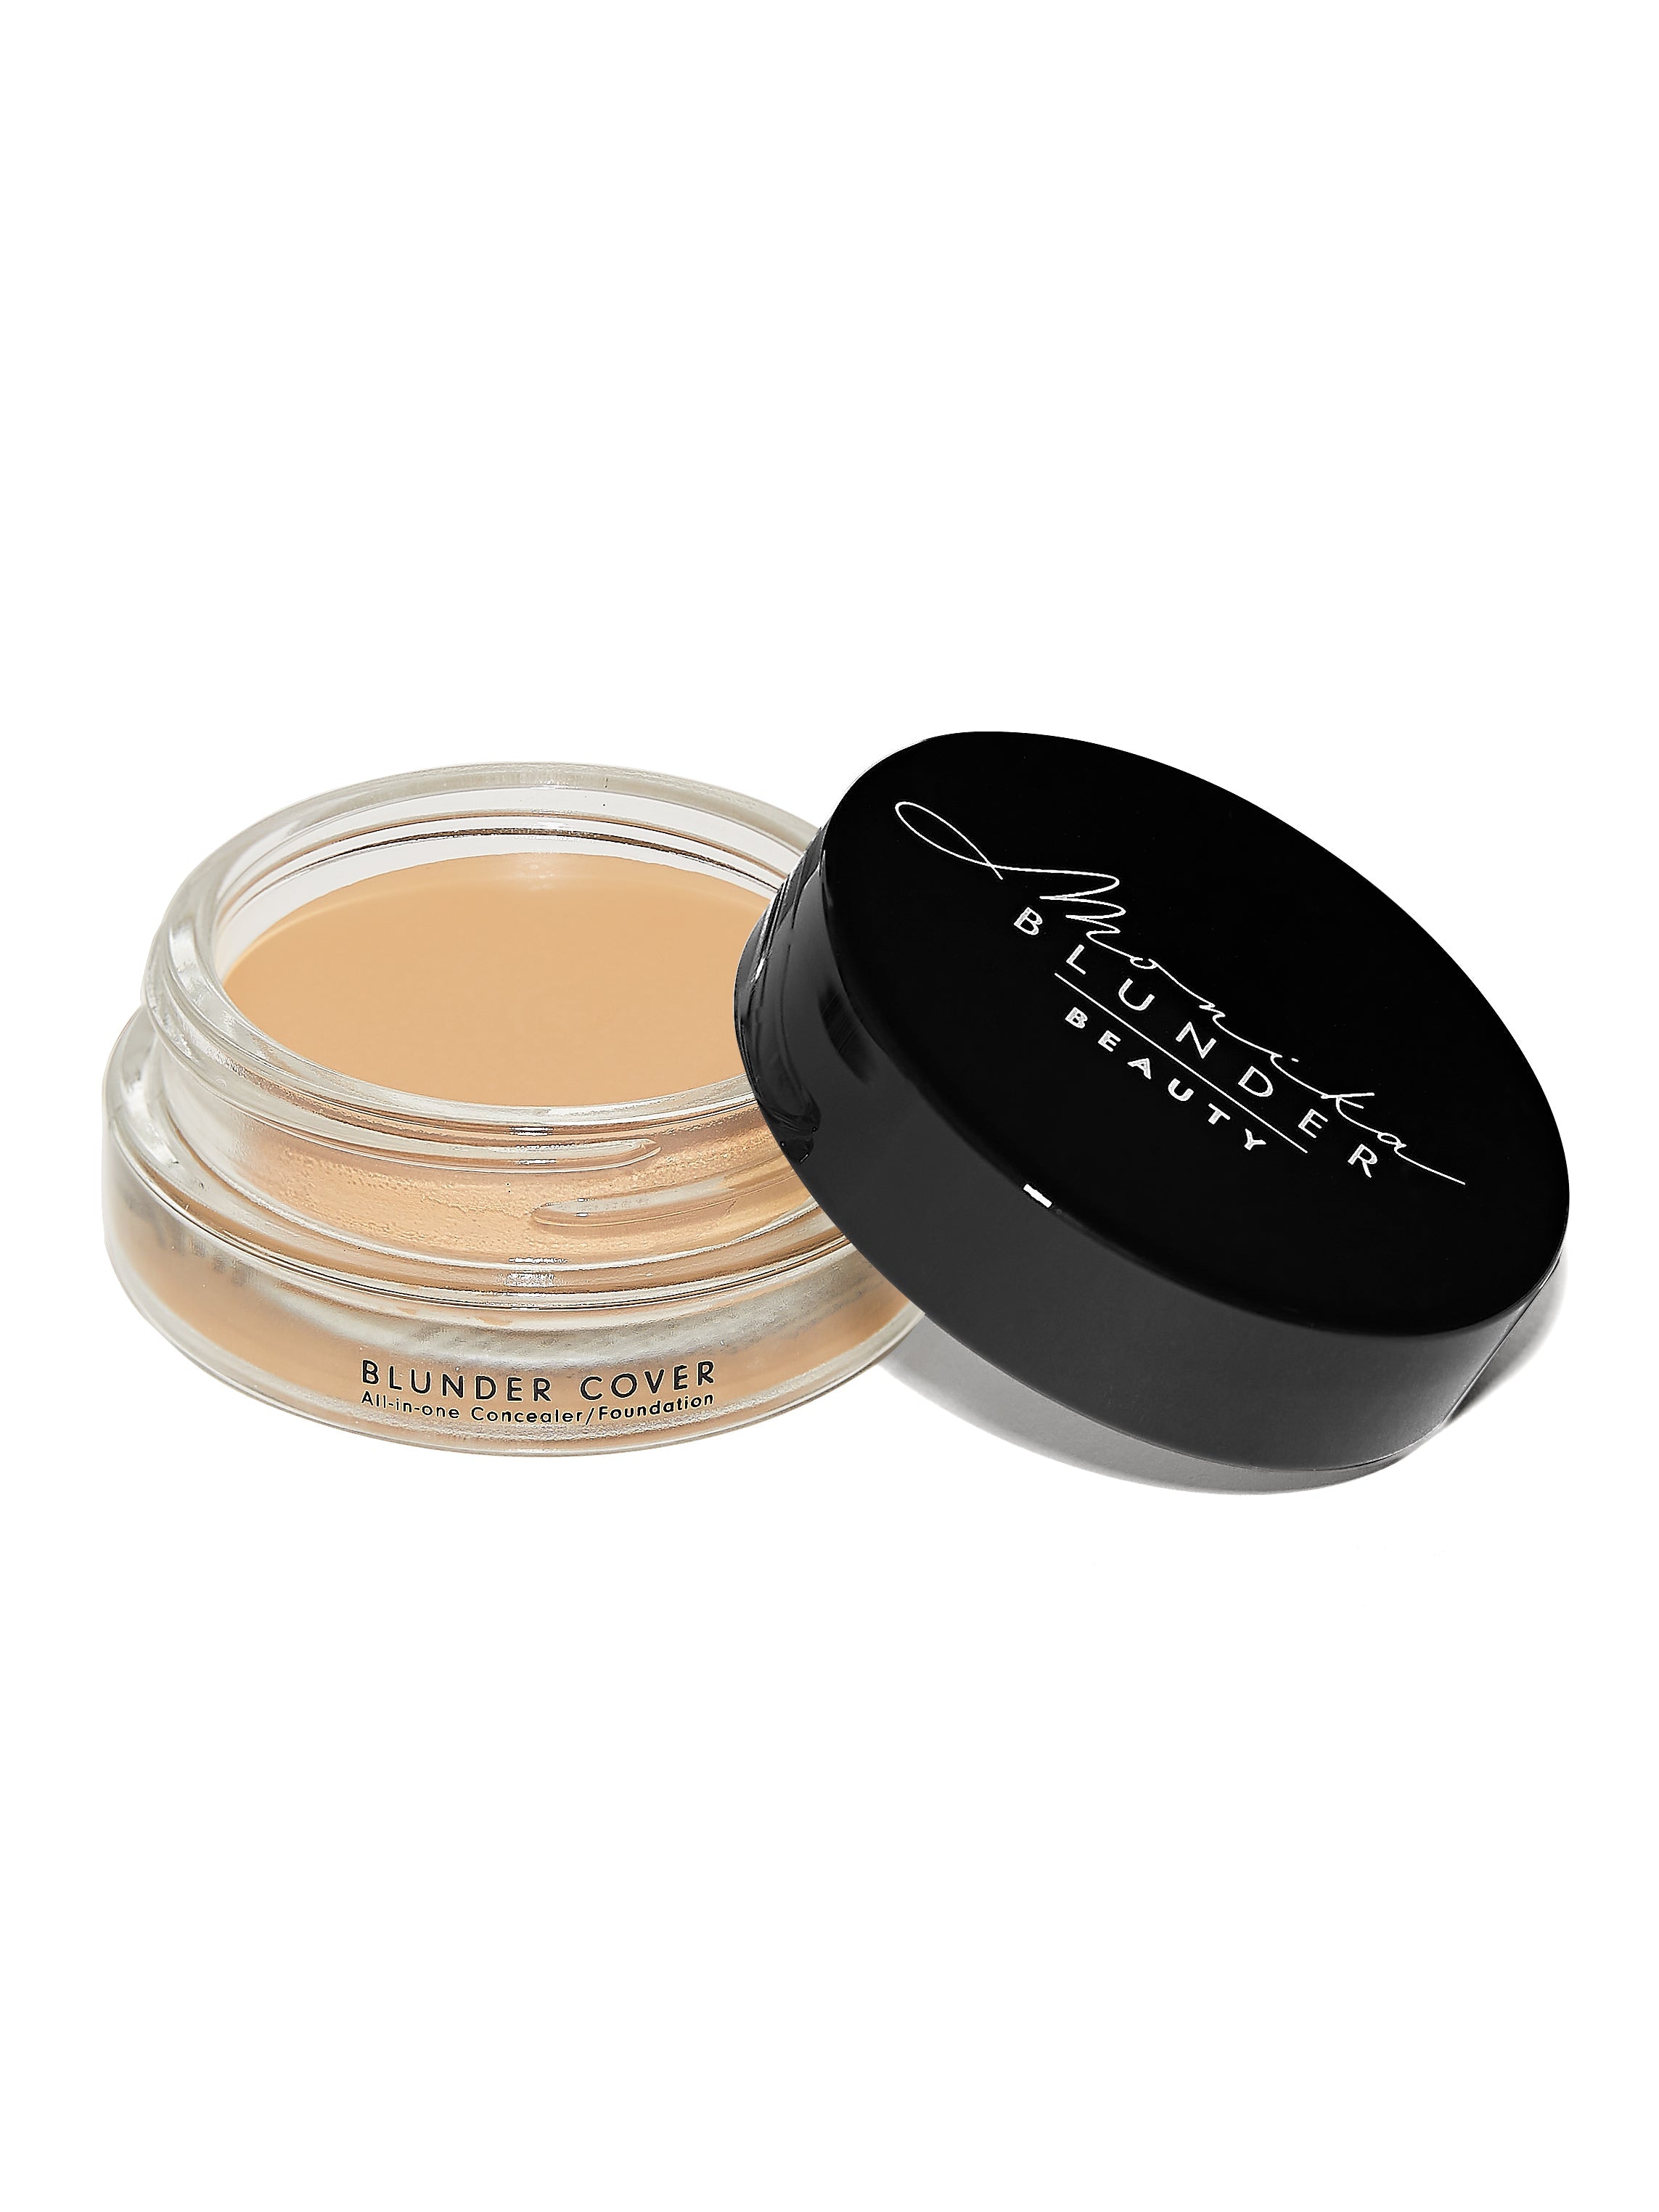 Blunder Cover an All-In-One Foundation/Concealer  - Drei.5 - 0